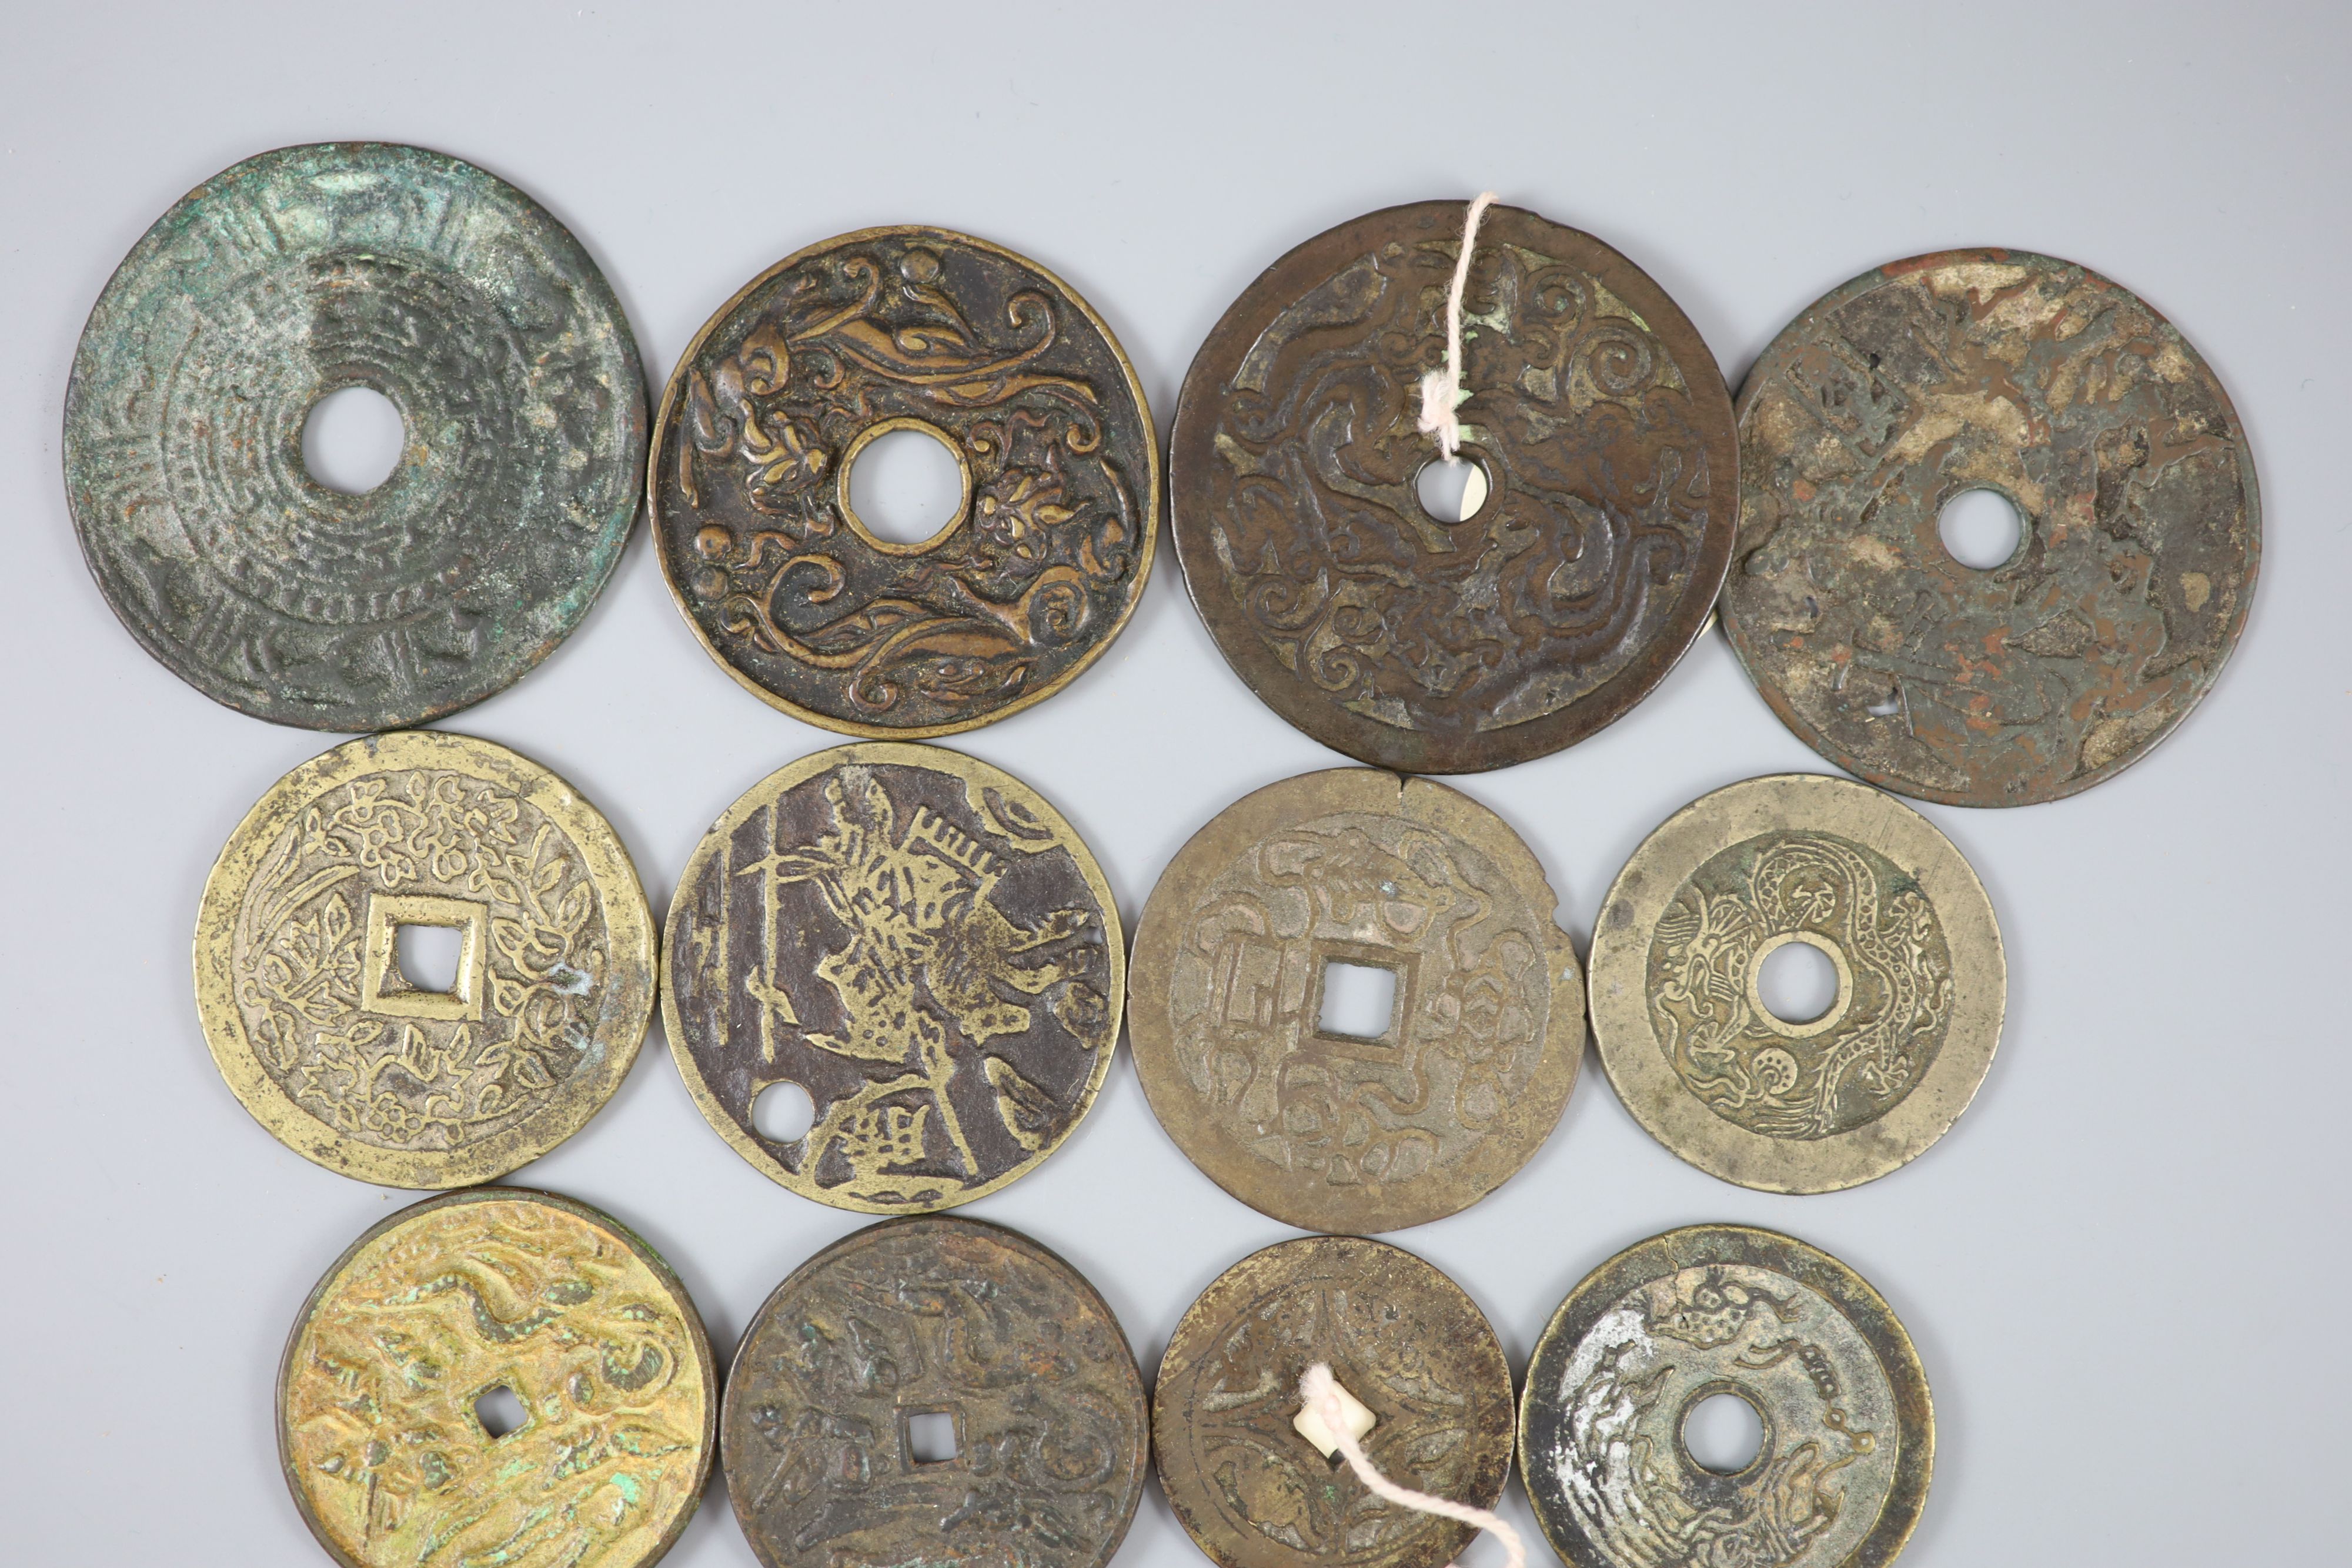 China, 17 bronze or copper charms or amulets, Qing dynasty or earlier,